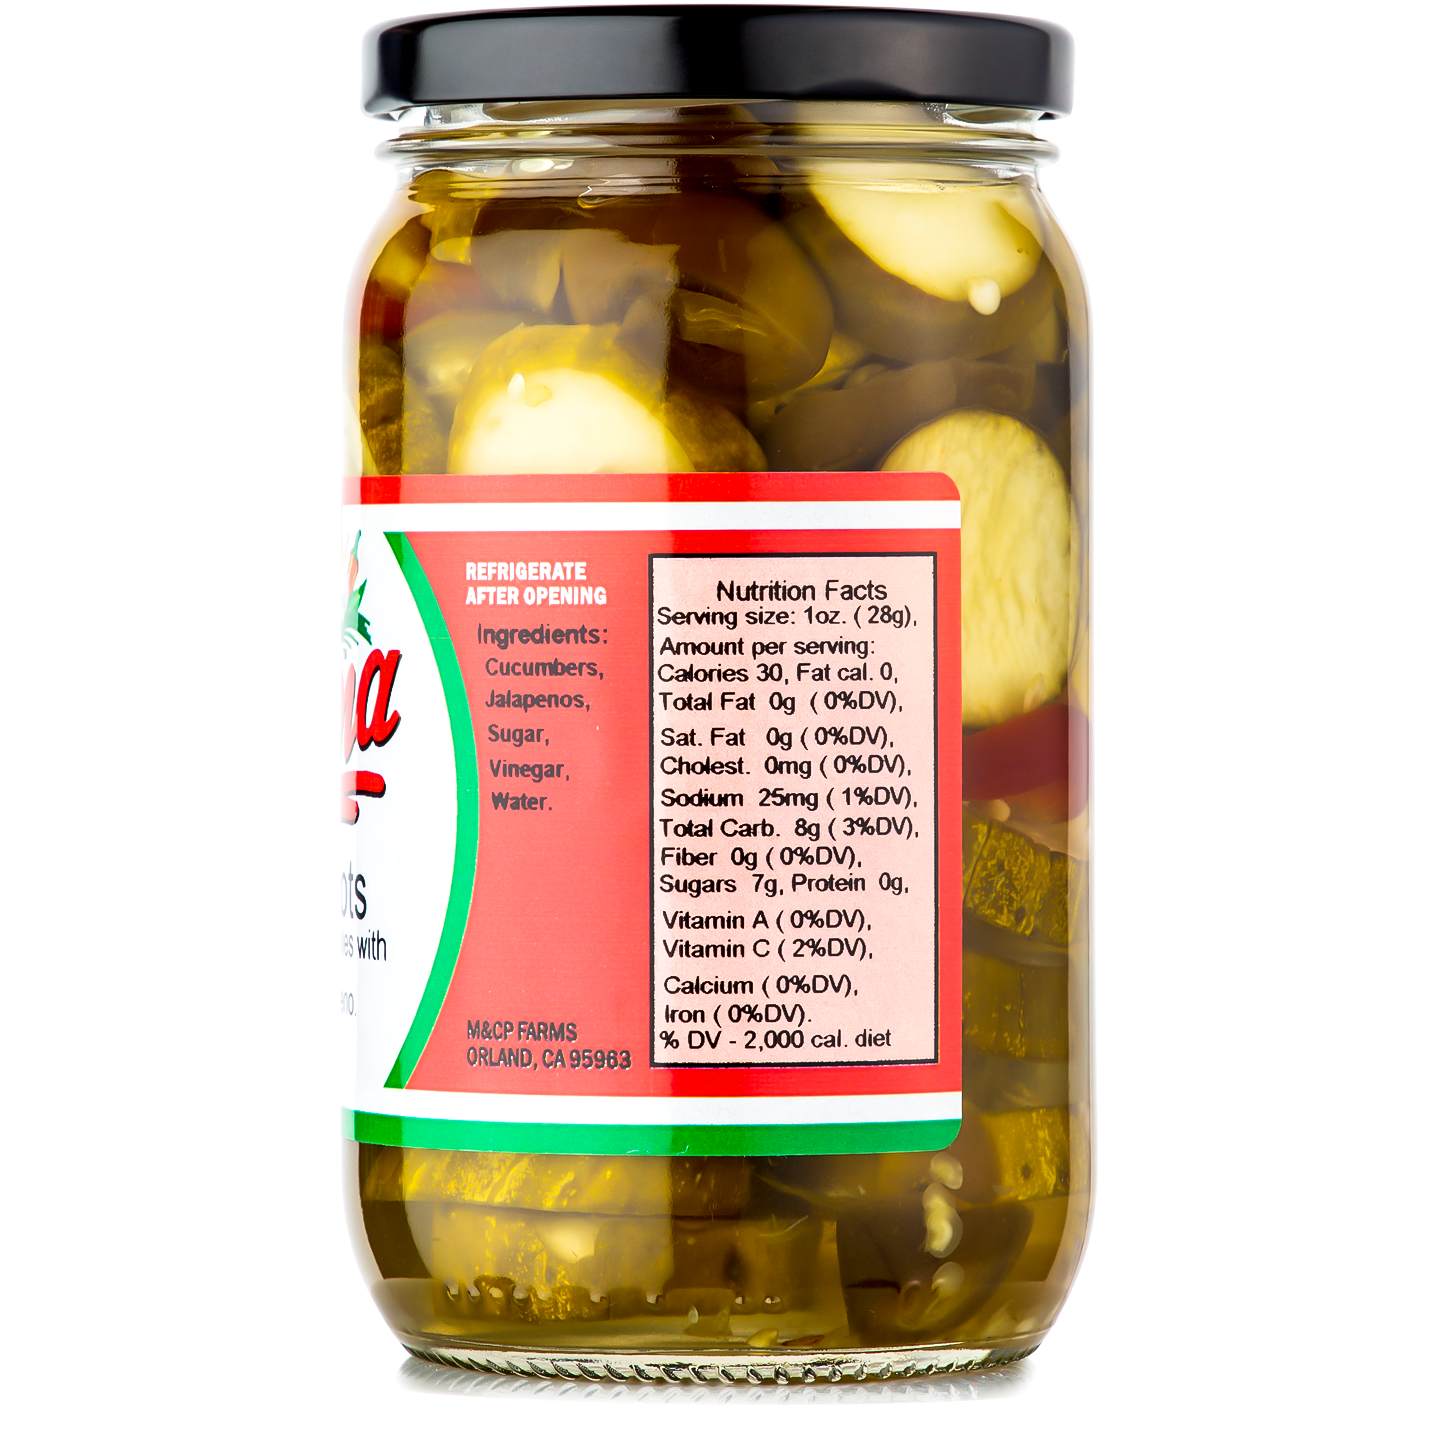 Sweet-Hots (sliced pickle with jalapeño) (Case of 12)